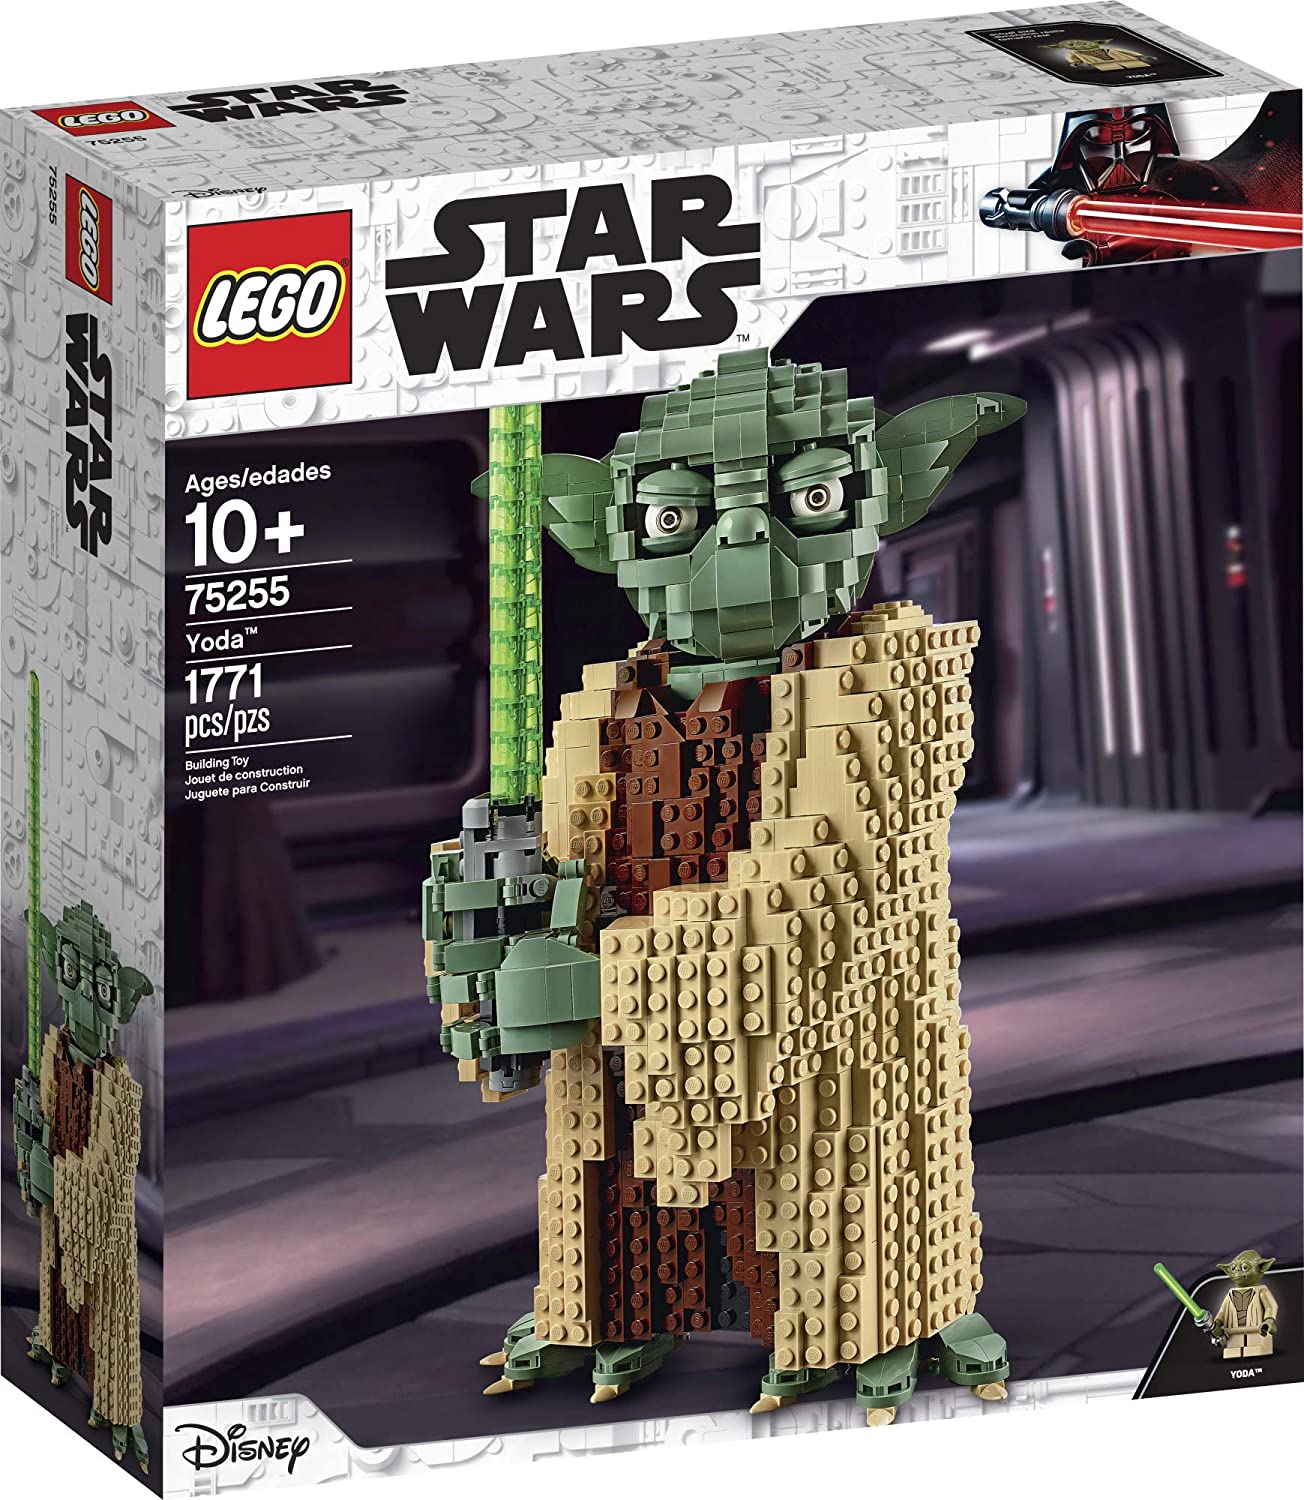 Top 5 Best LEGO Yoda Sets Reviews in 2022 3